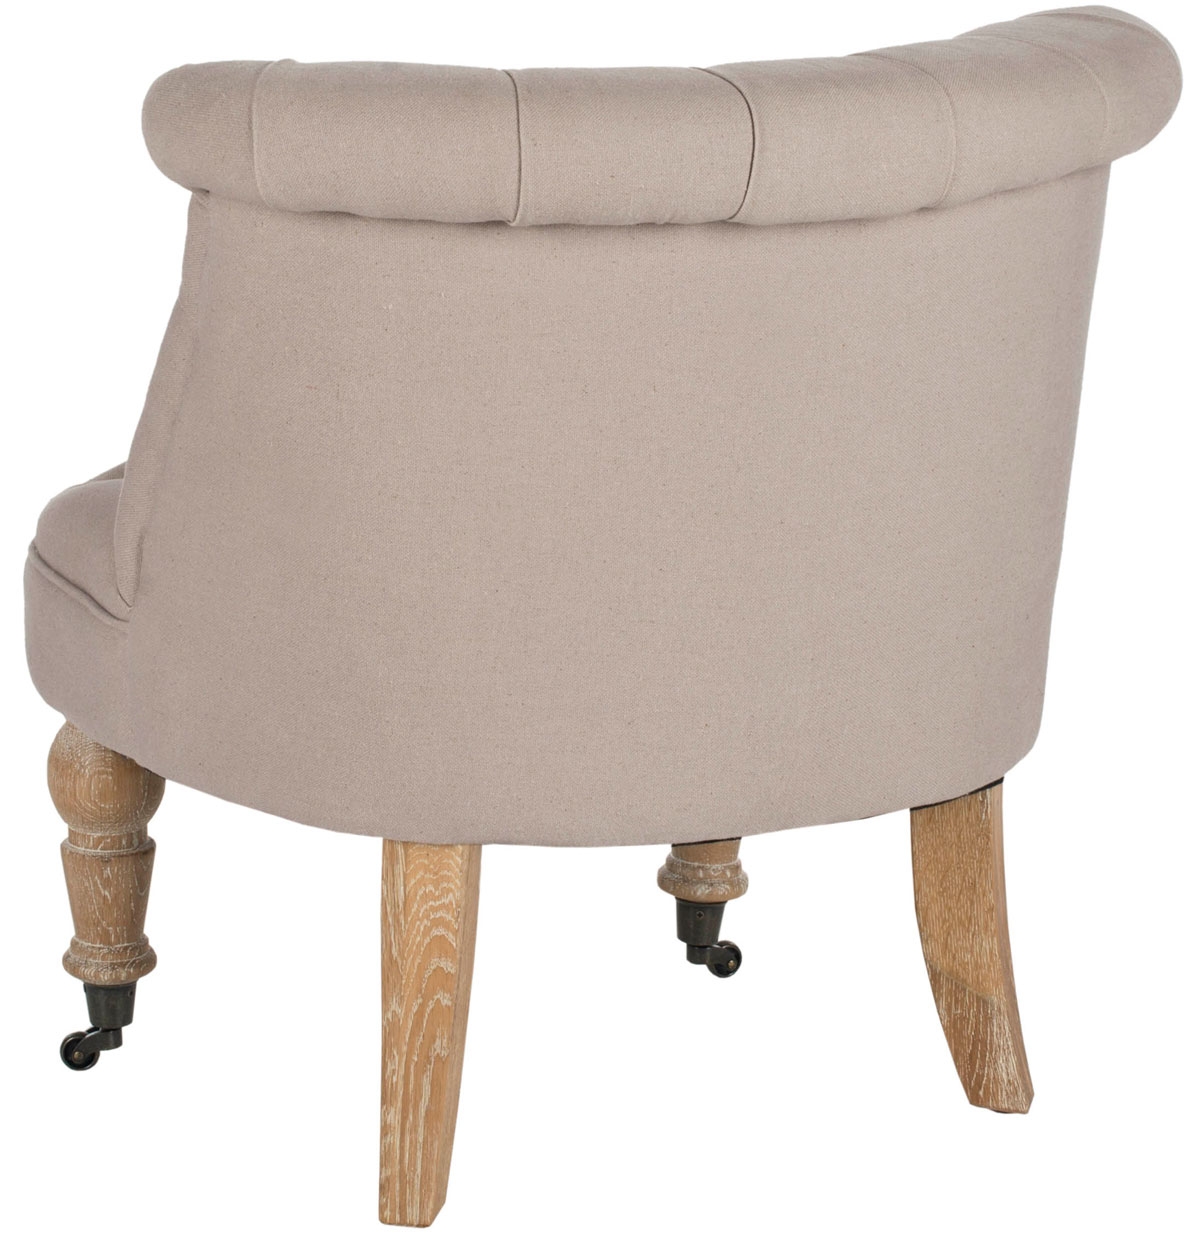 Carlin Tufted Chair - Taupe/White Wash - Arlo Home - Image 1